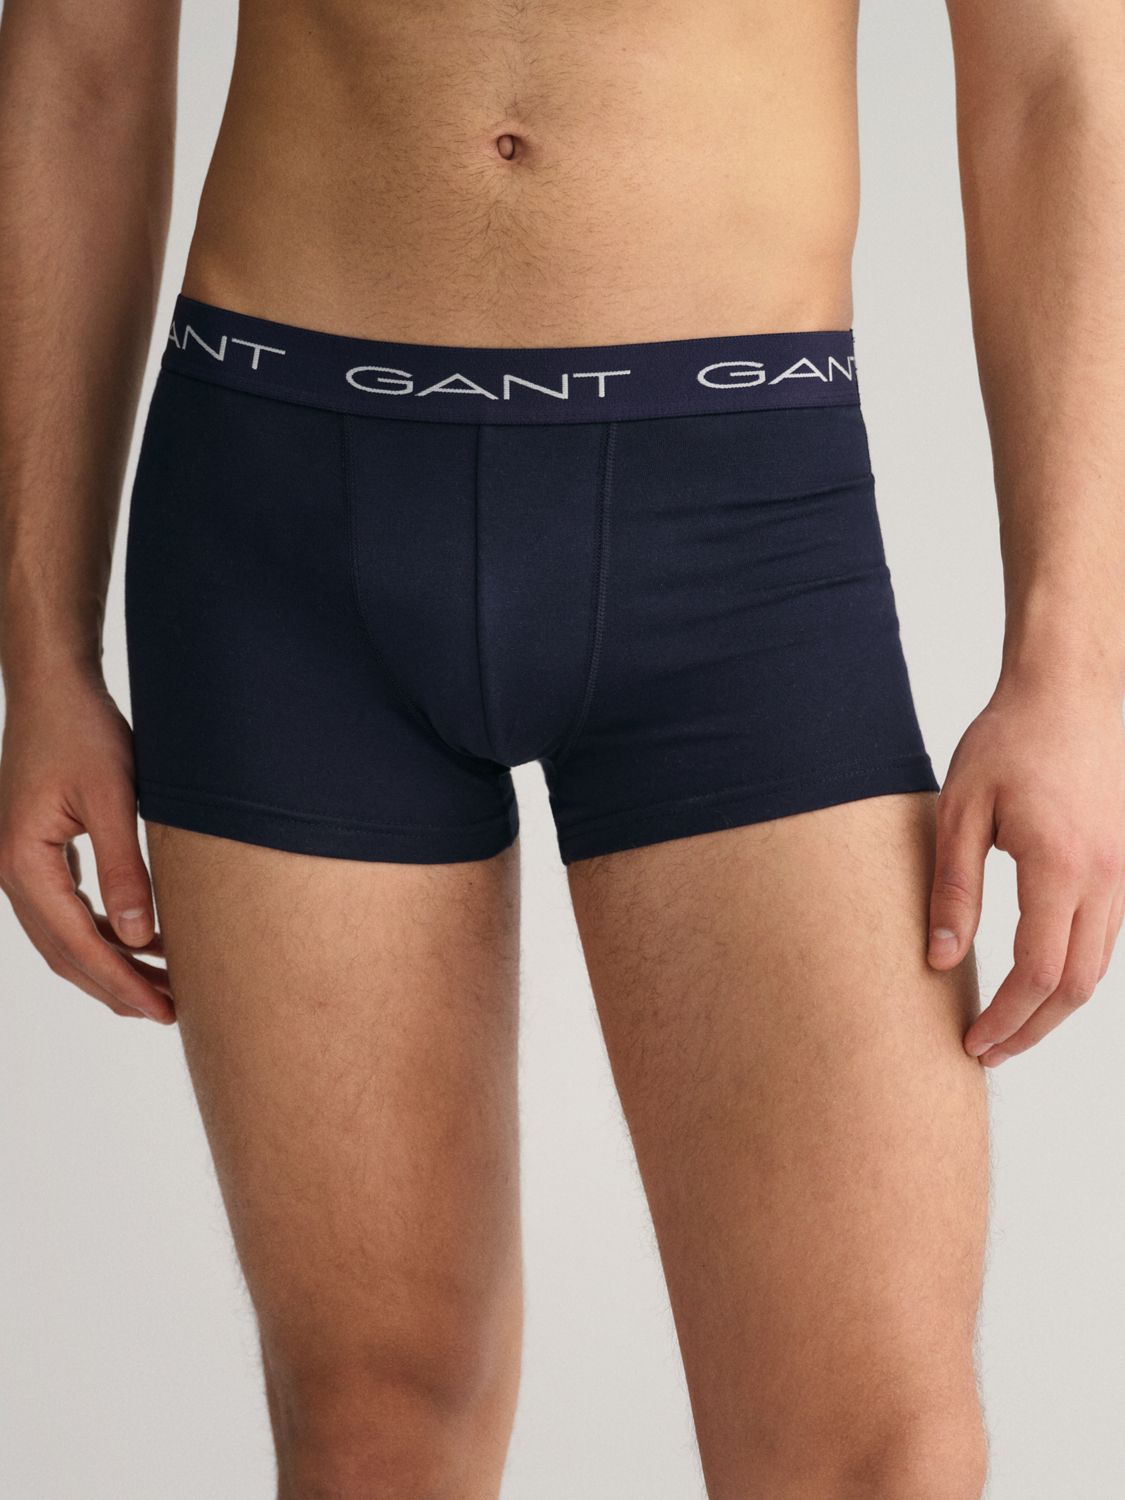 Buy GANT Cotton Stretch Jersey Trunks, Pack of 3 Online at johnlewis.com